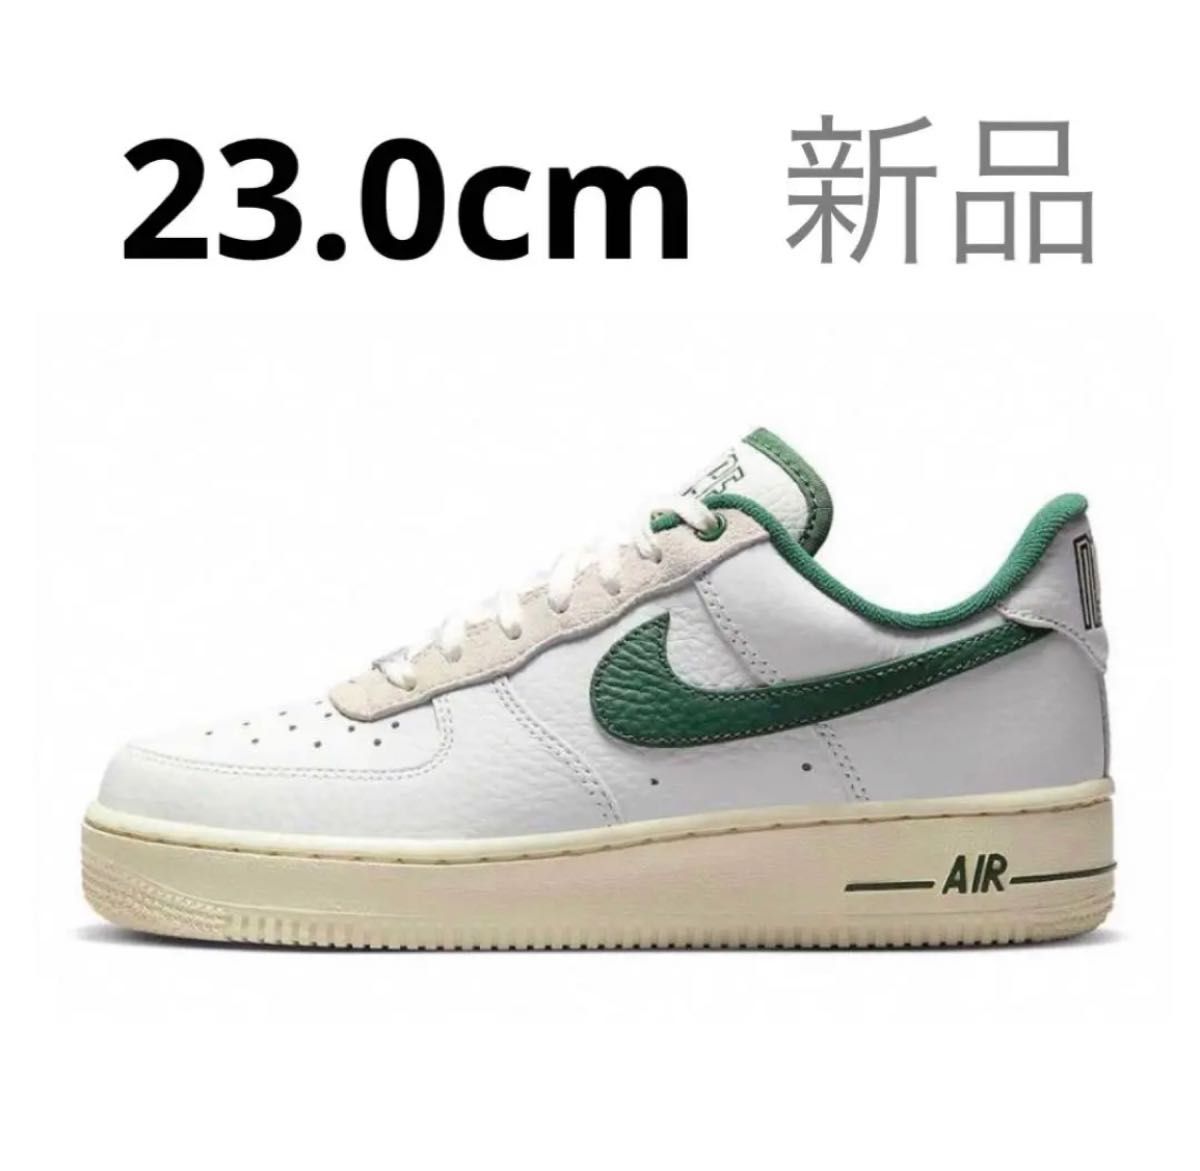 NIKE WMNS AIR FORCE 1 '07 “GORGE GREEN”｜PayPayフリマ